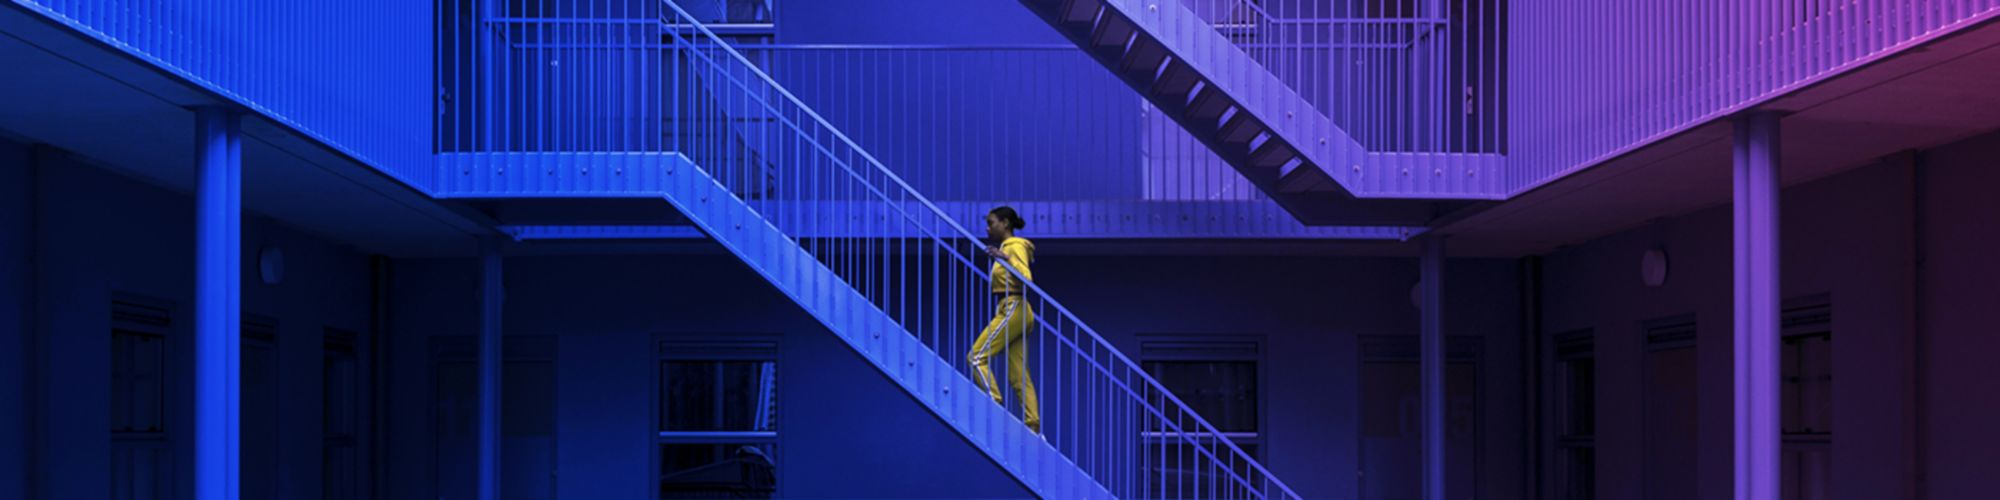 Woman walking on stairs